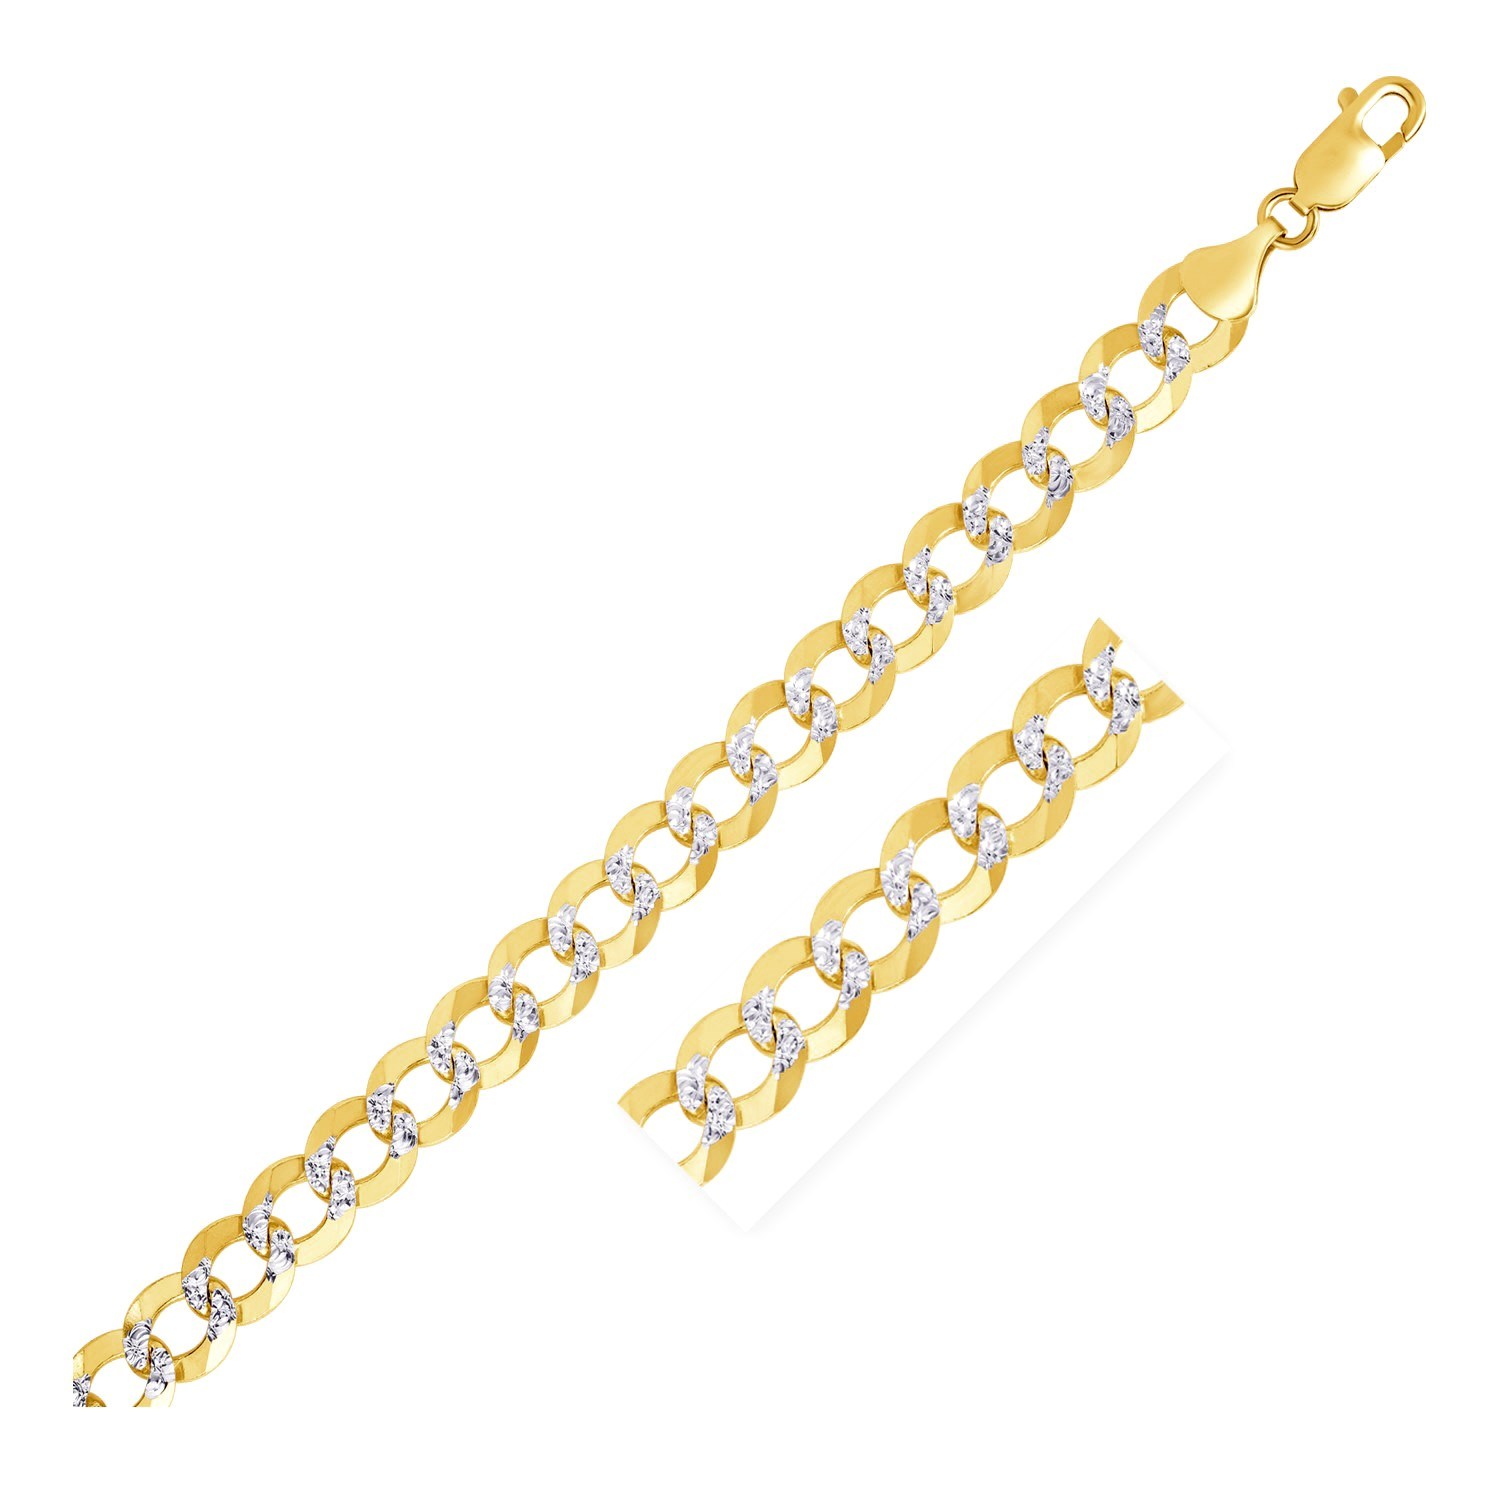 8.2 mm 14k Two Tone Gold Pave Curb Chain